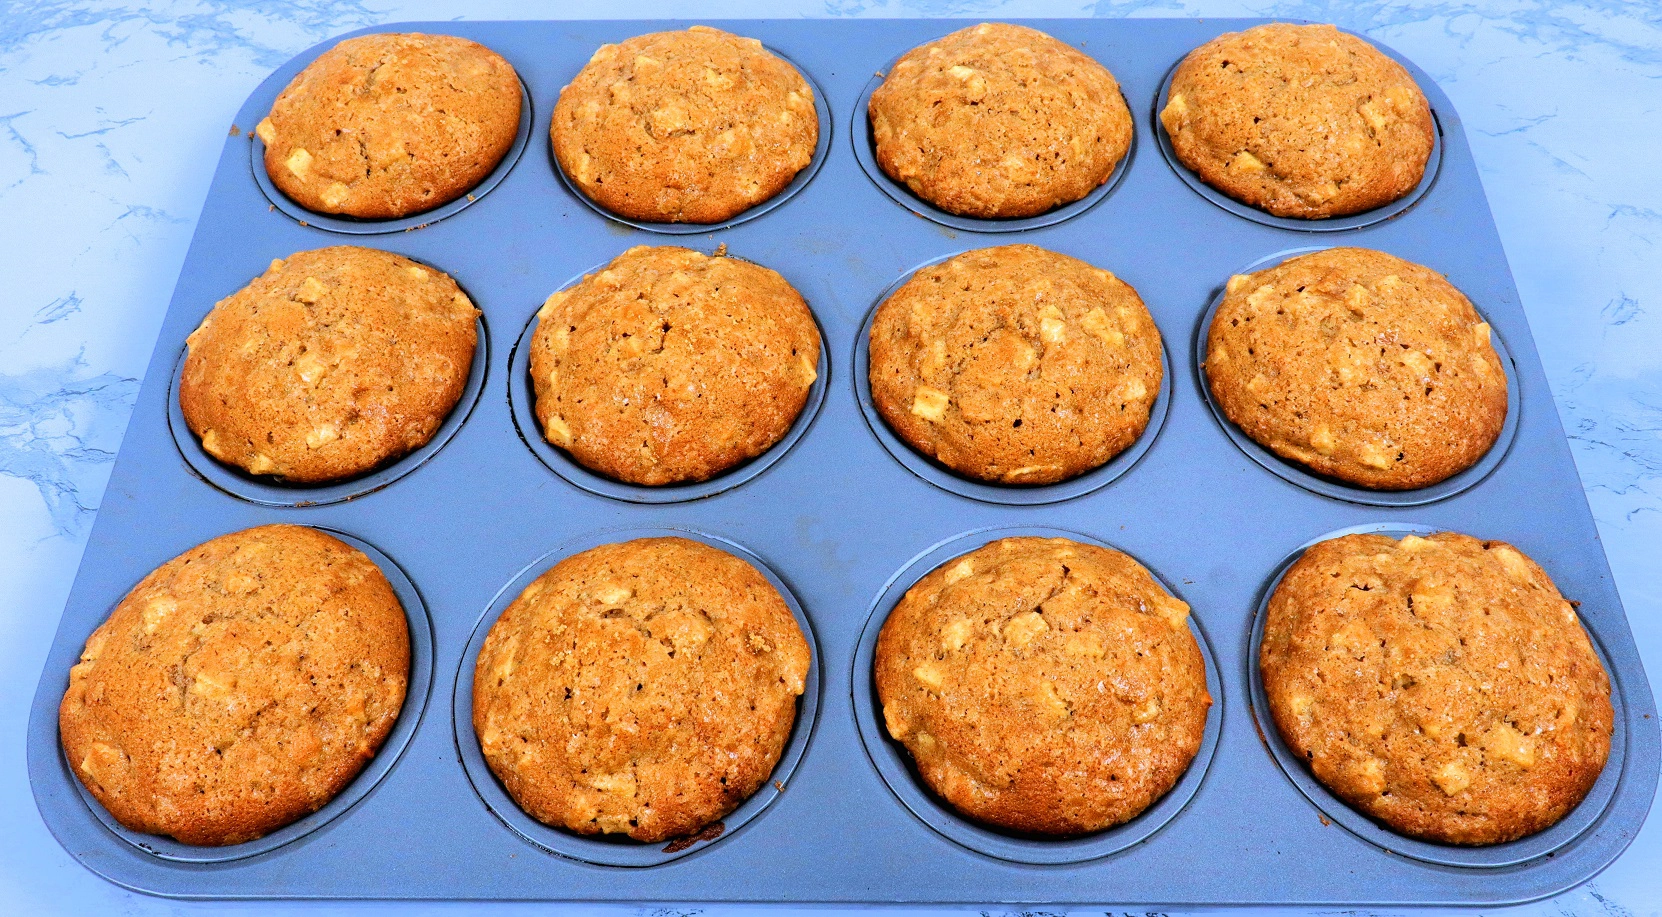 Muffins Baked